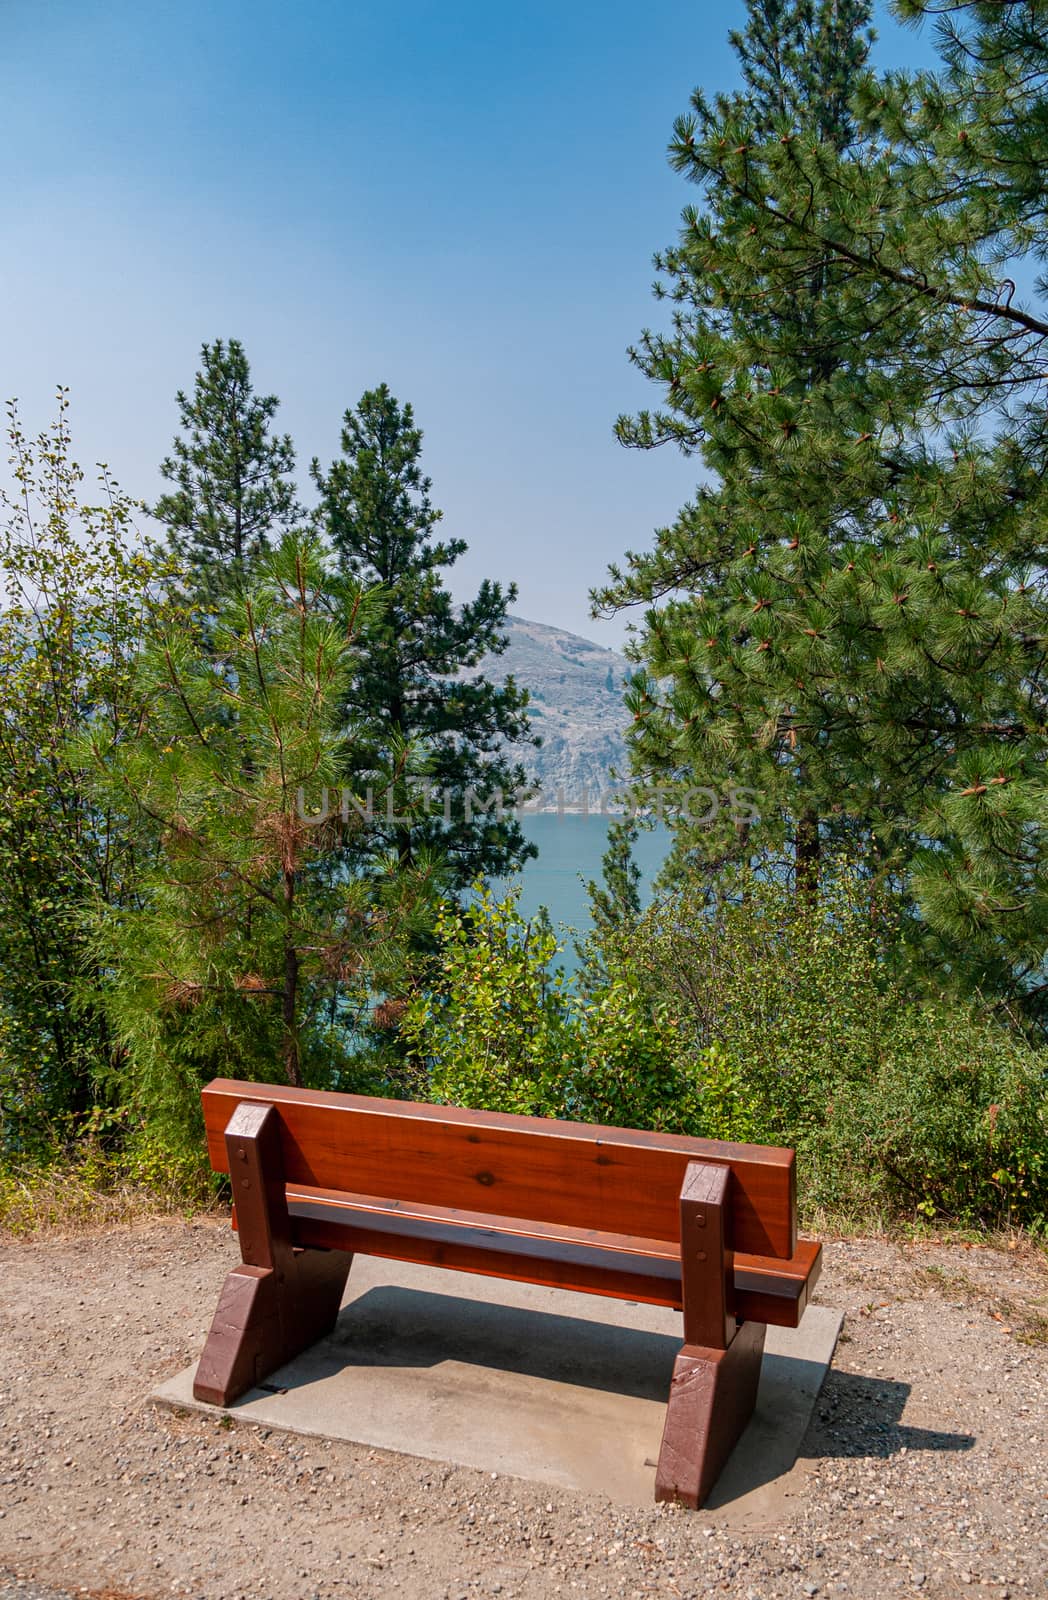 Wooden bench in rest area on hike route with beautiful view over a lake